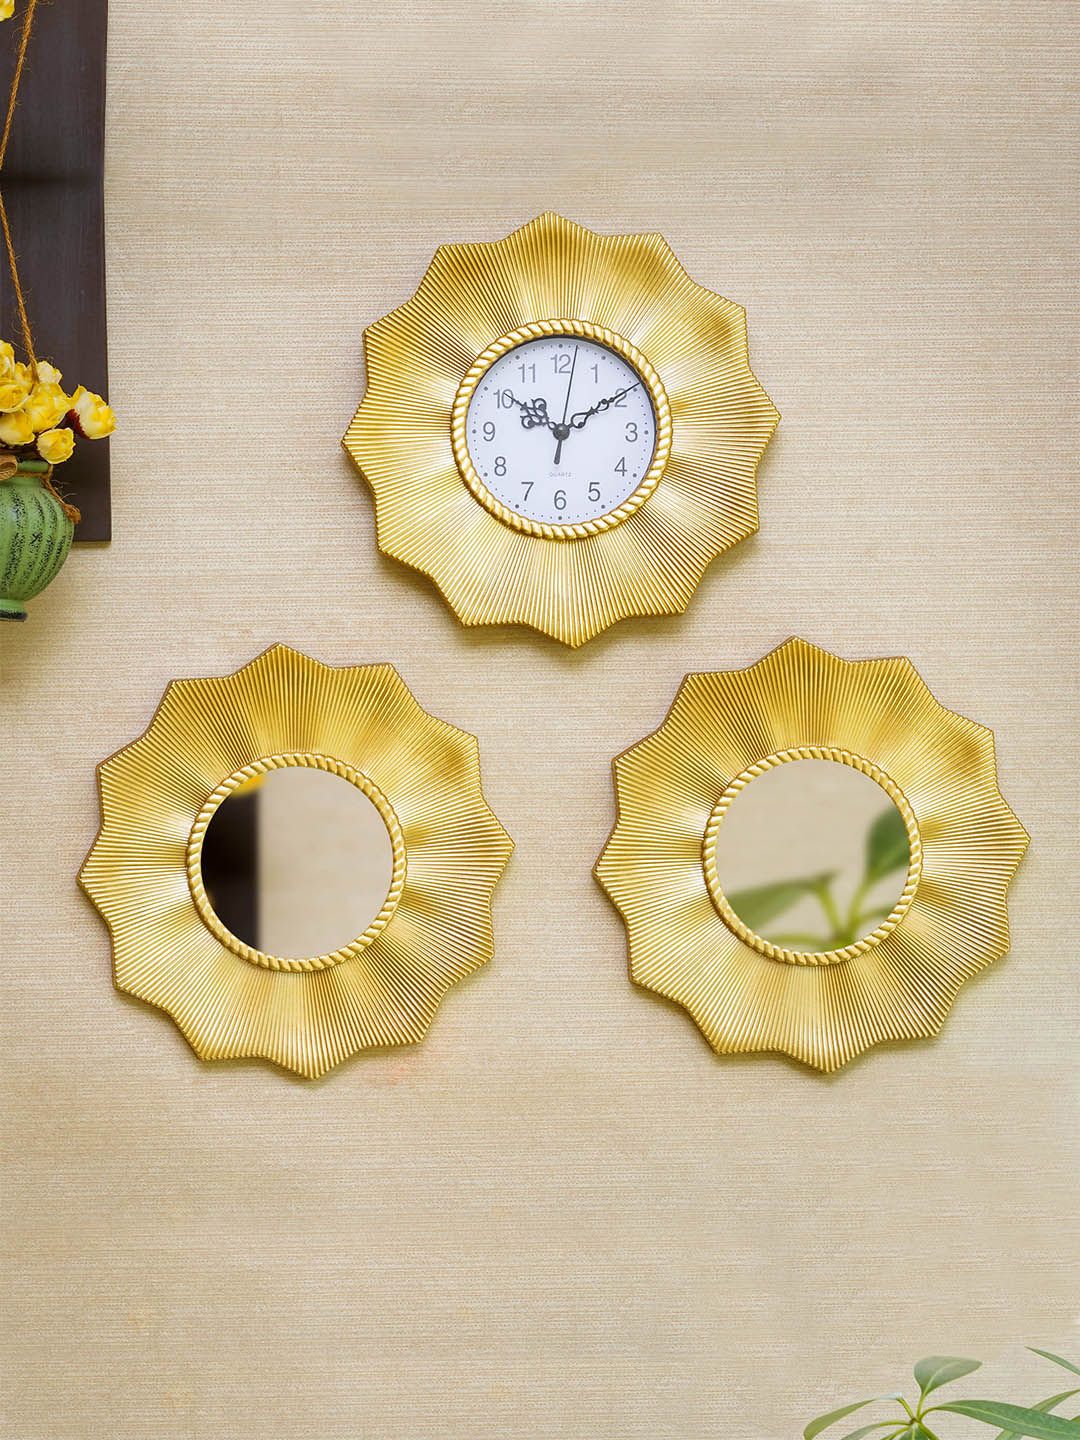 TIED RIBBONS Gold-Toned & White Set of 3 Floral Contemporary Wall Clock Price in India